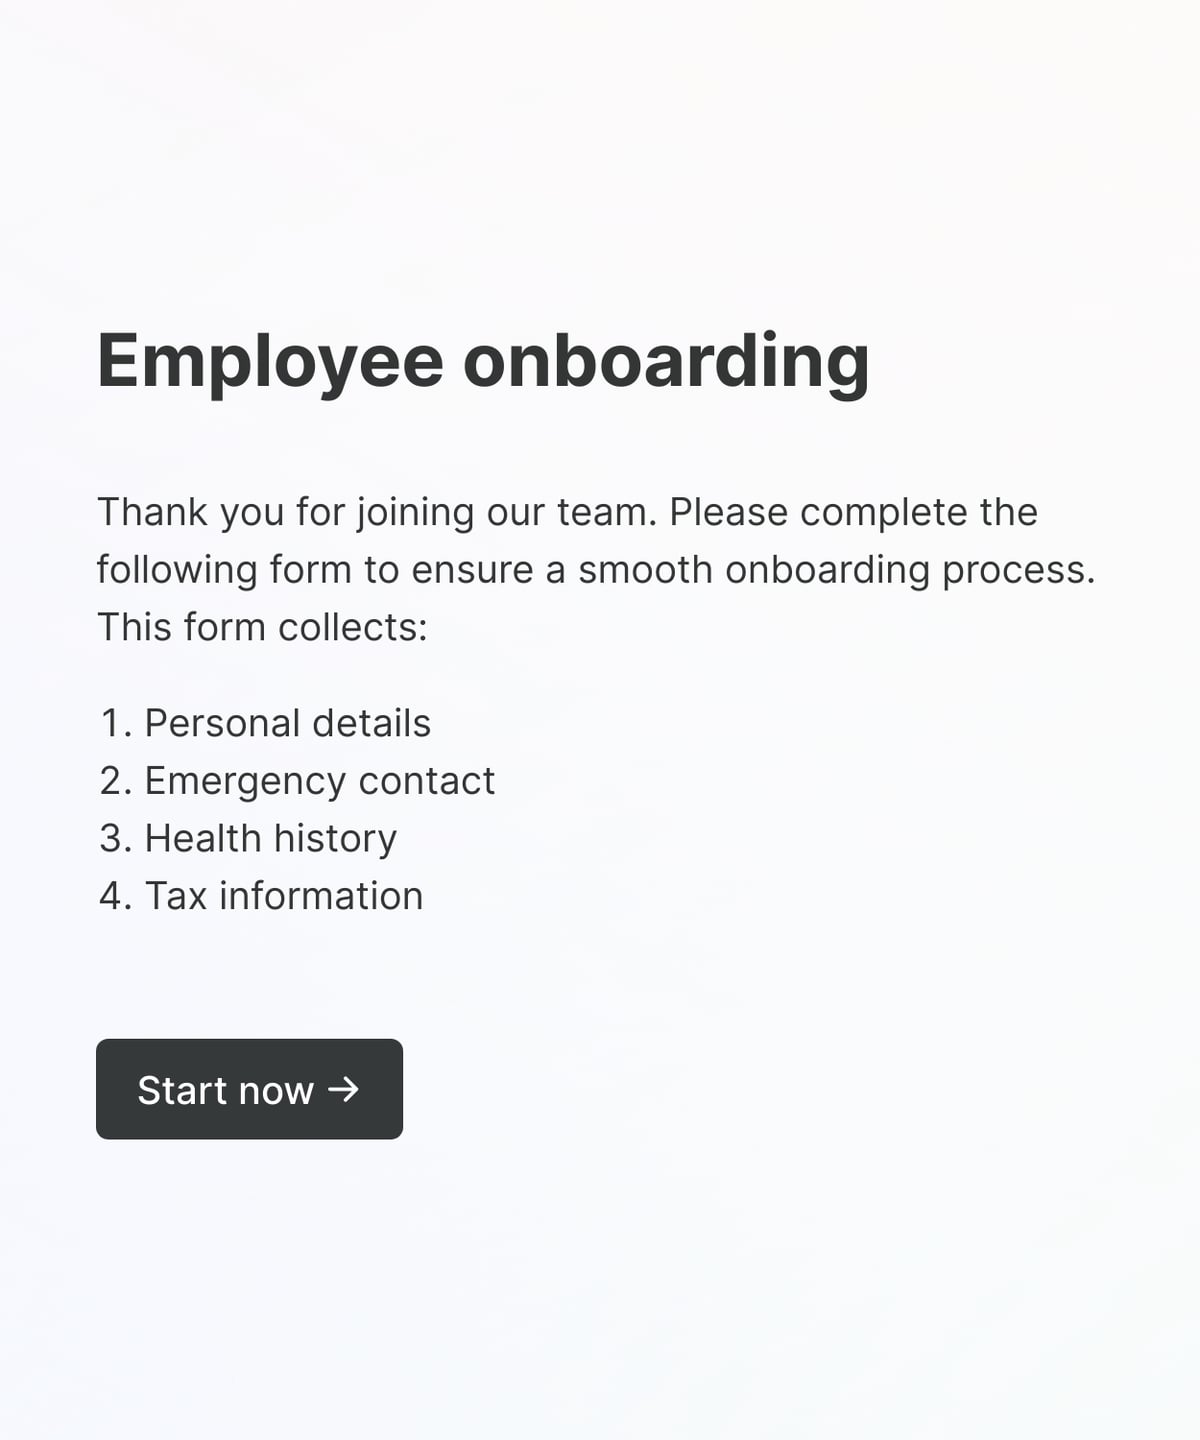 Intro page of an employee onboarding form with a short welcome text, a list of form pages, and a 'Start now' button